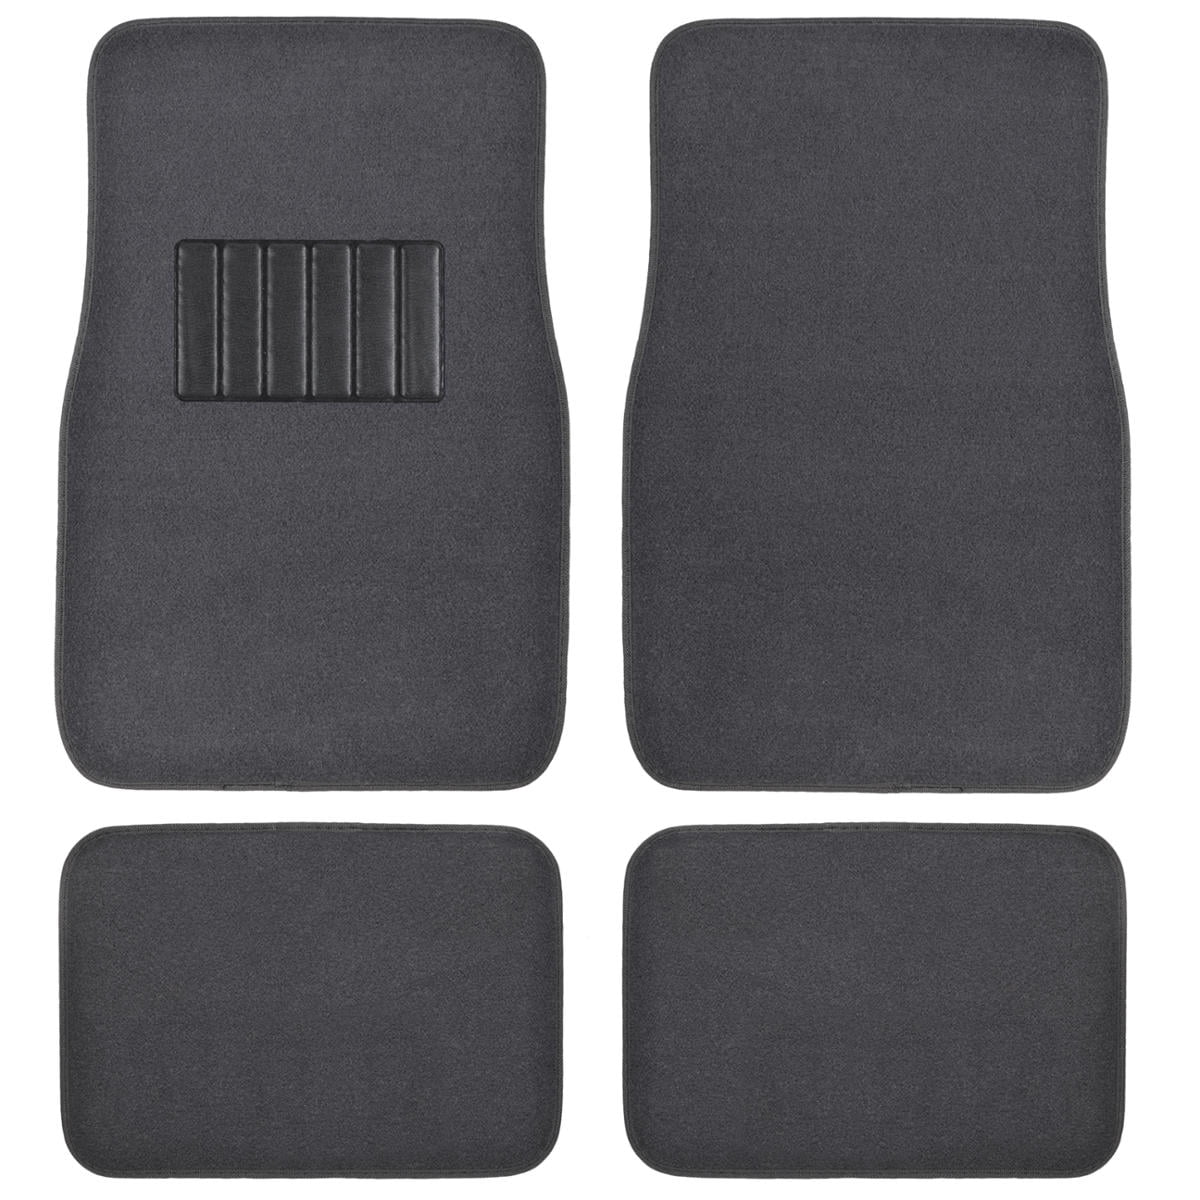 Universal Car Front Rear Floor Foot Mats Anti-Slip Football Sports Car Mat  Full Set of 4 Pieces Carpet Heavy Duty All Weather Protection Fit for